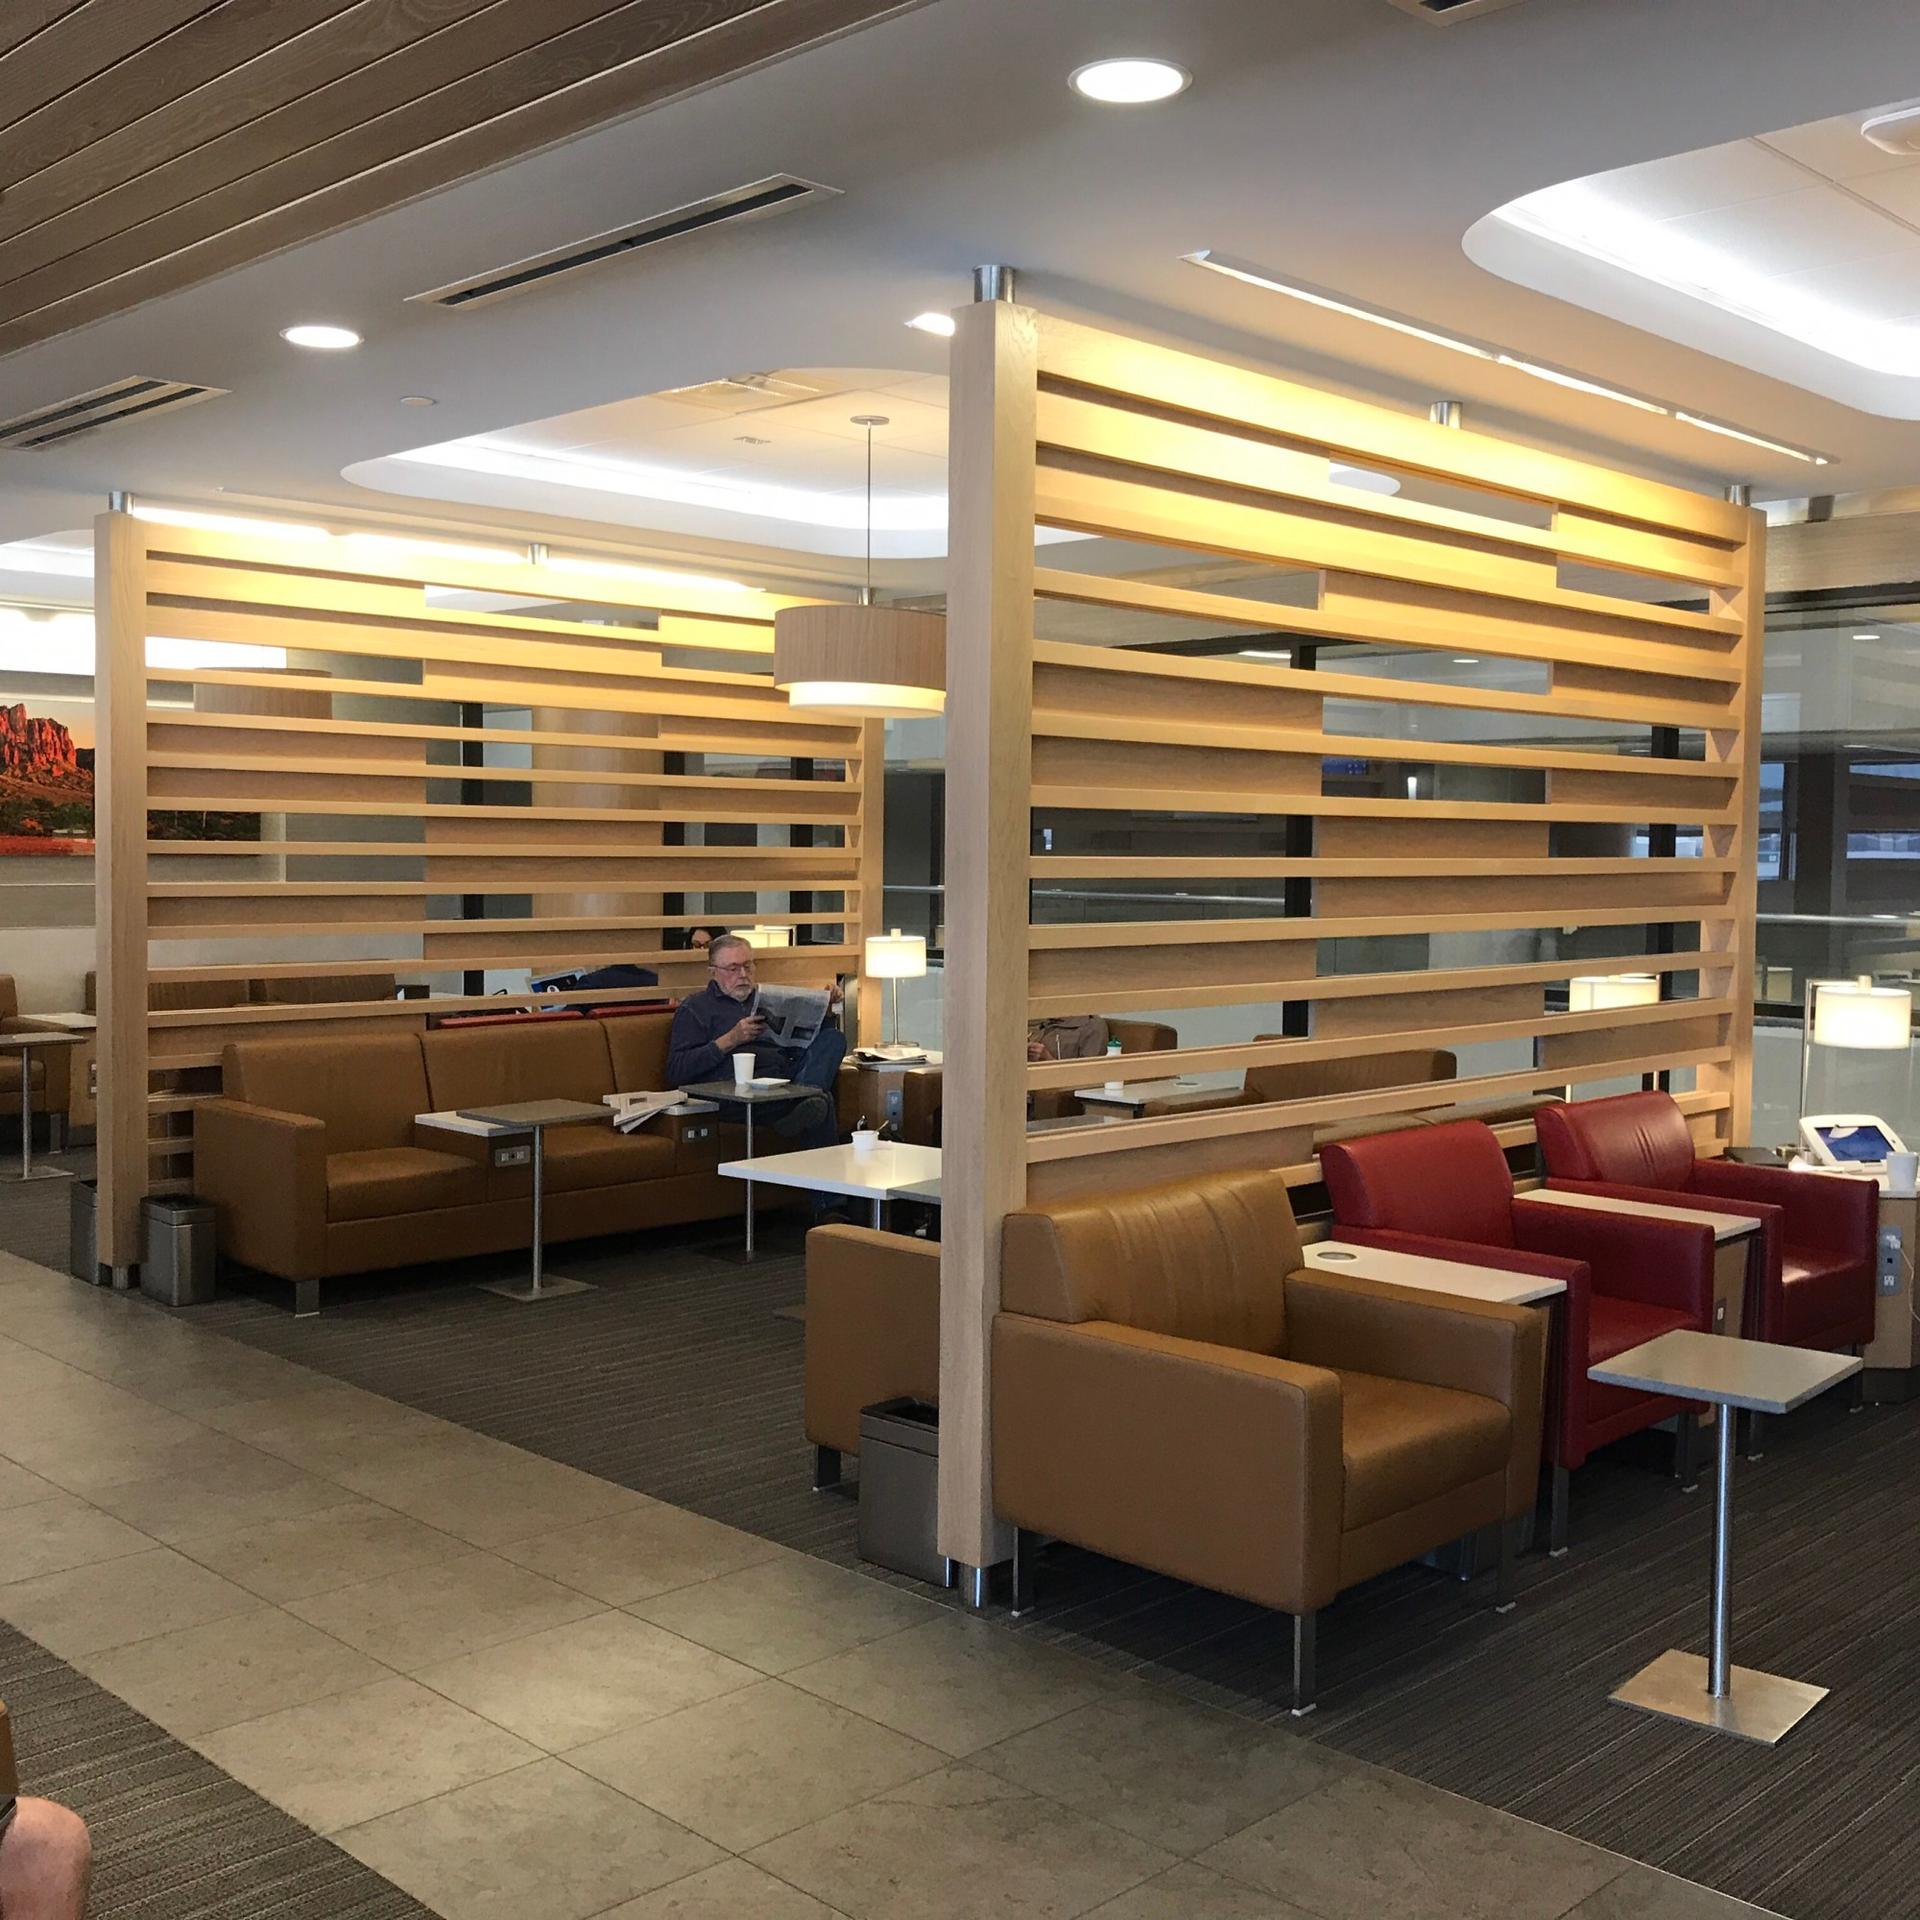 American Airlines Admirals Club (Gate A7) image 21 of 25